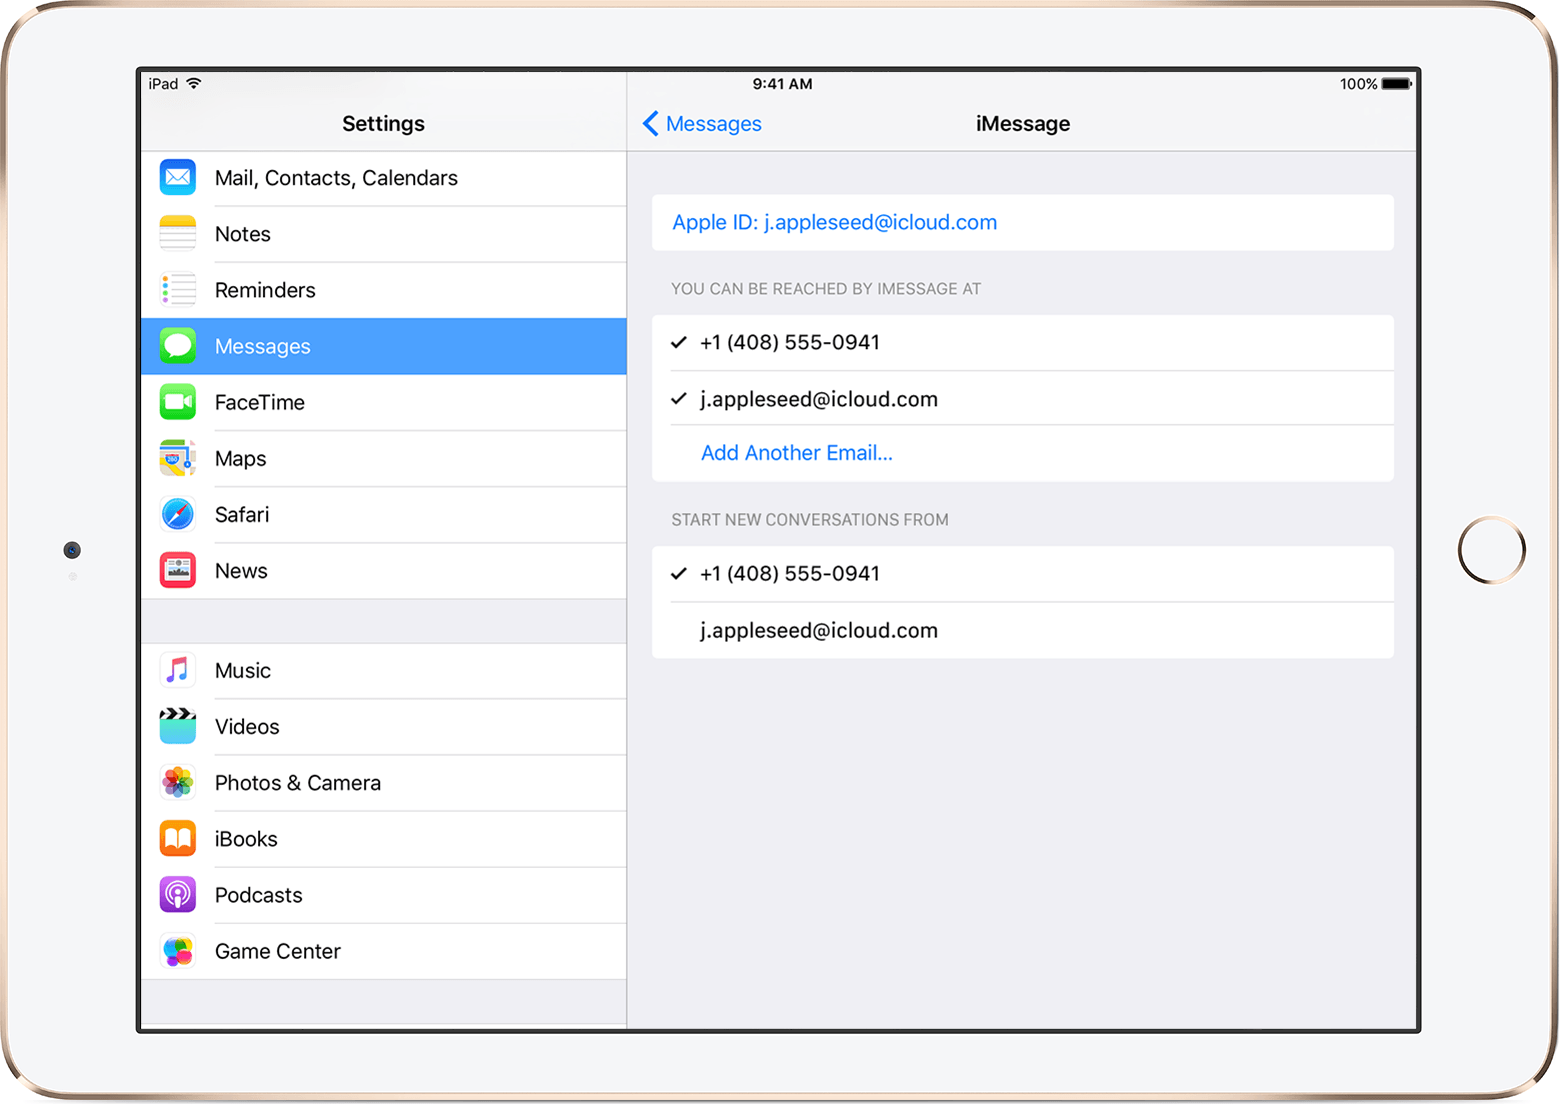 ipad-ios9-settings-messages-imessage-send-receive